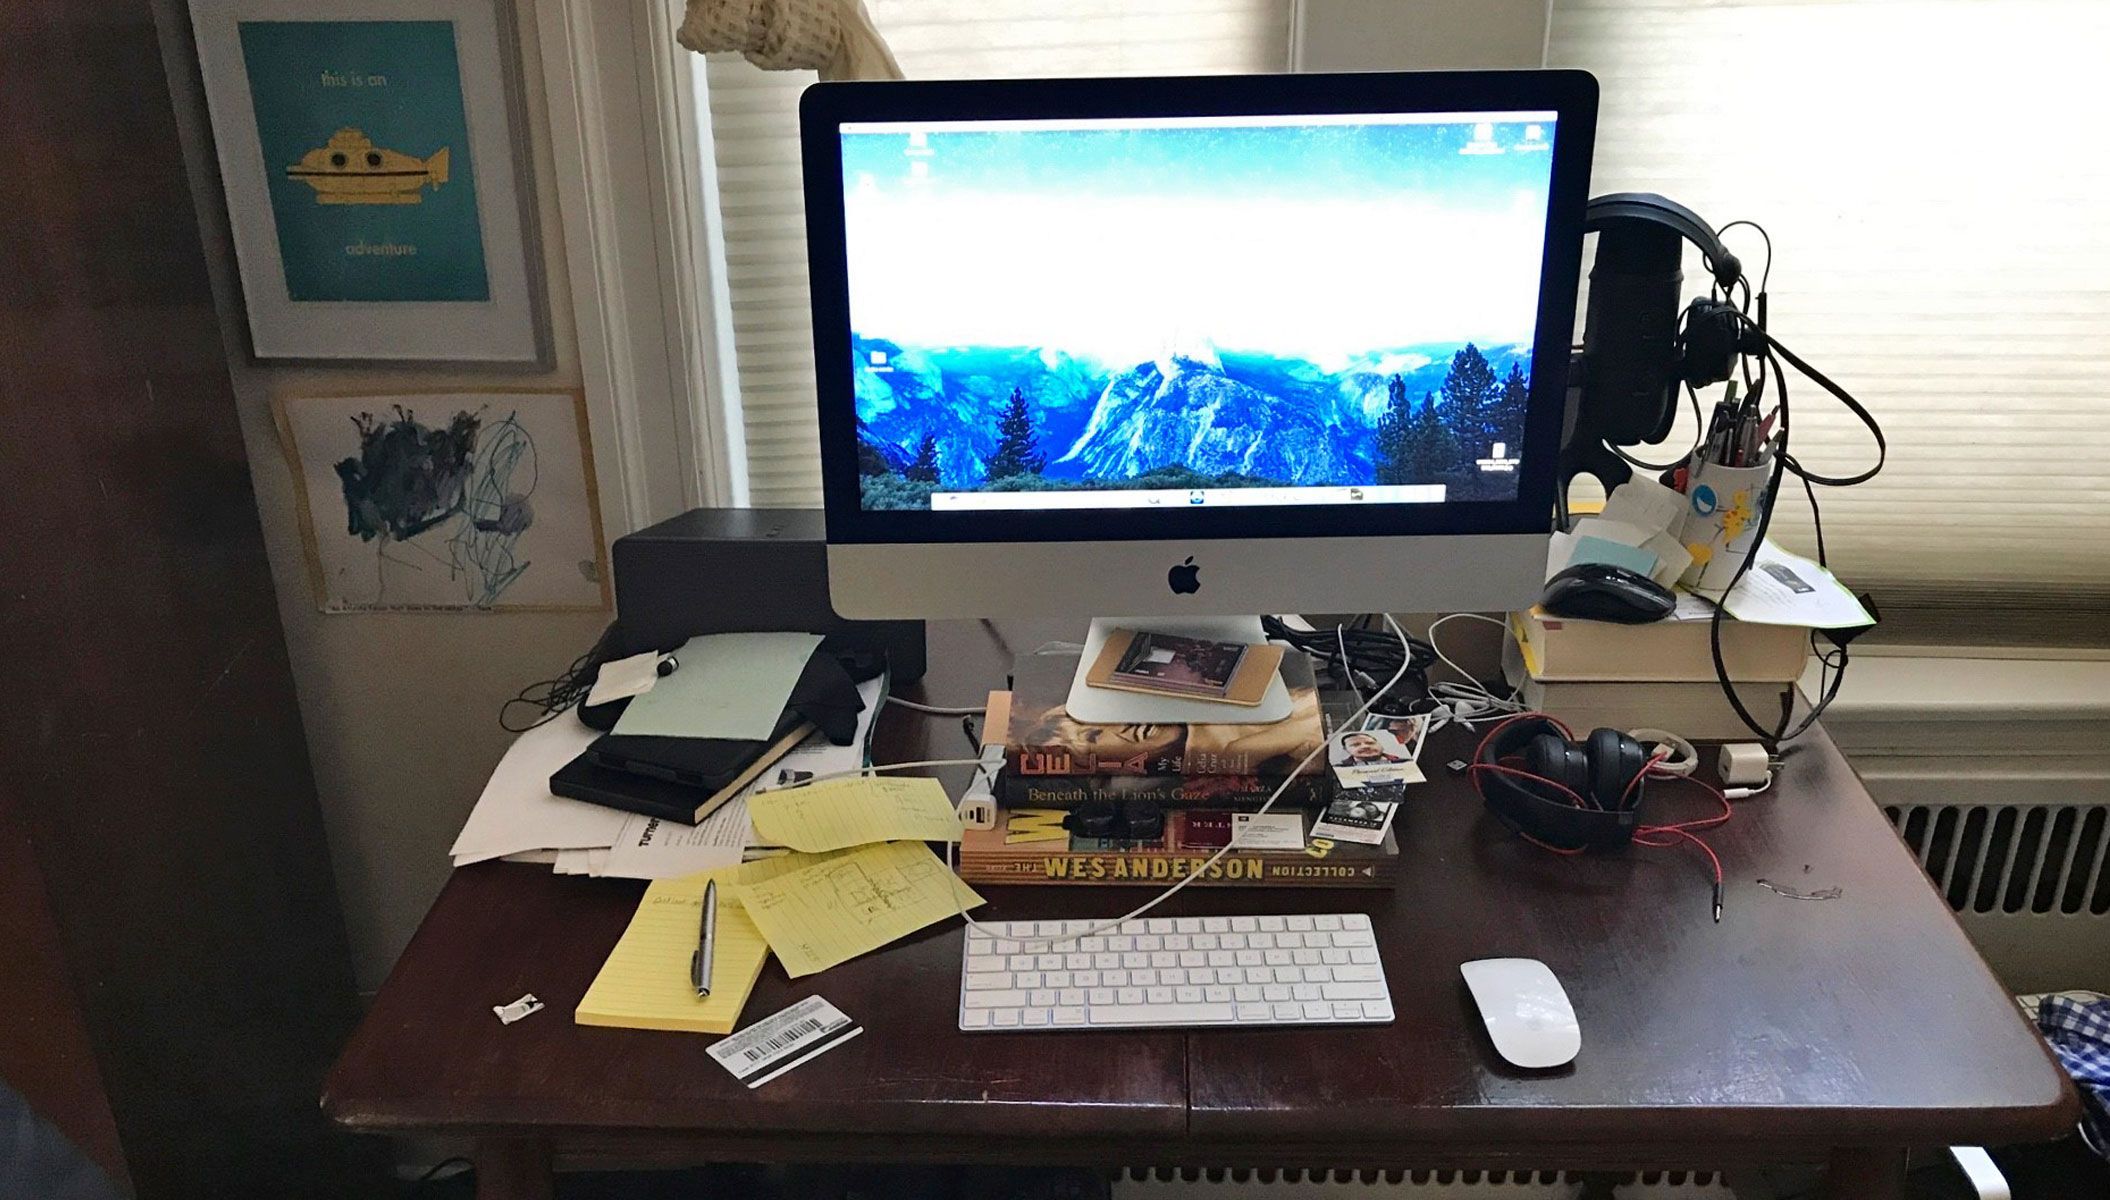 Lang’s World: An Expert’s Tips For Working from Home